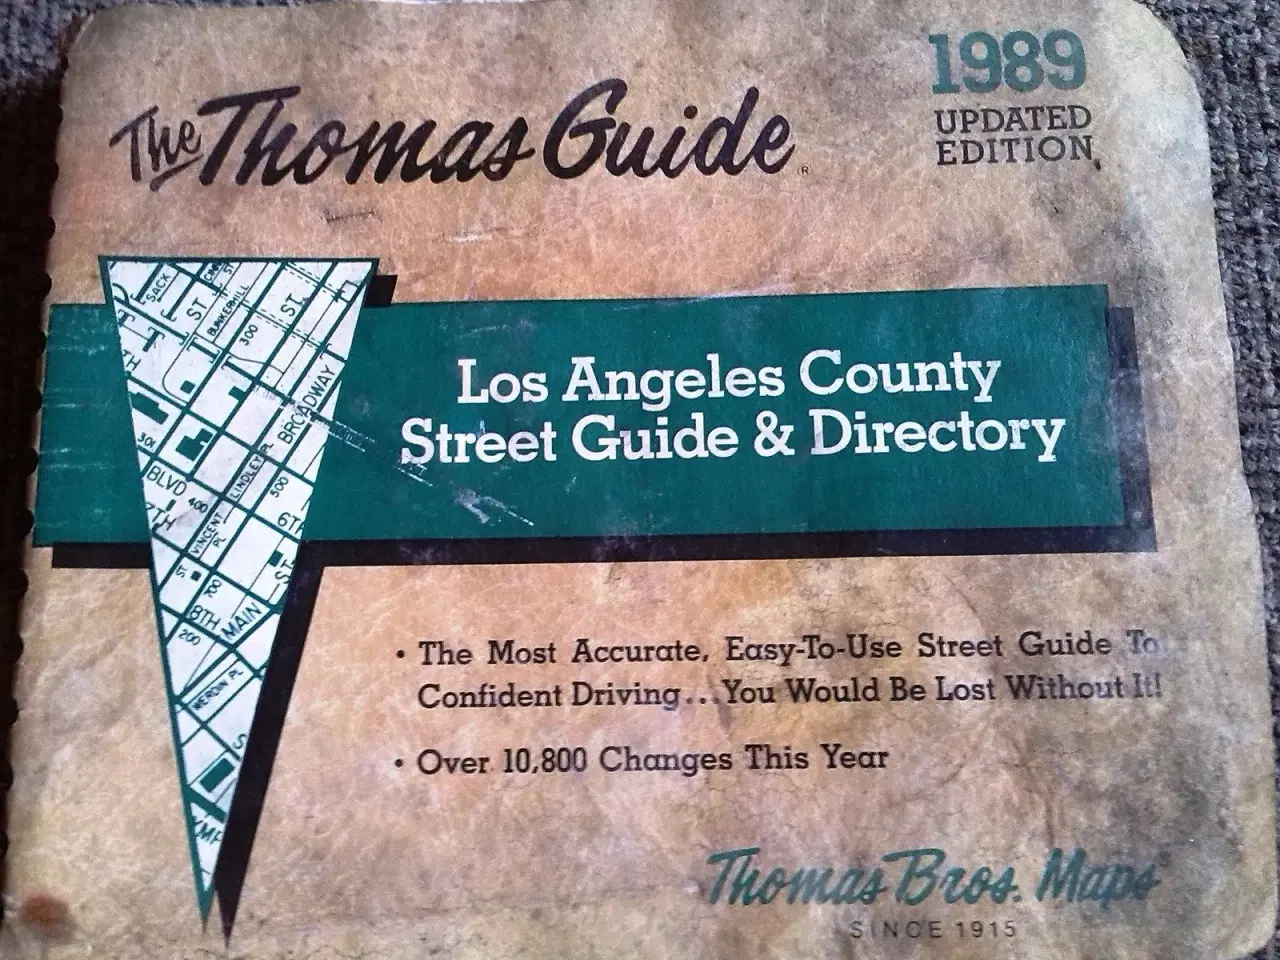 Billede 1 - The Thomas Guide, LA Country.